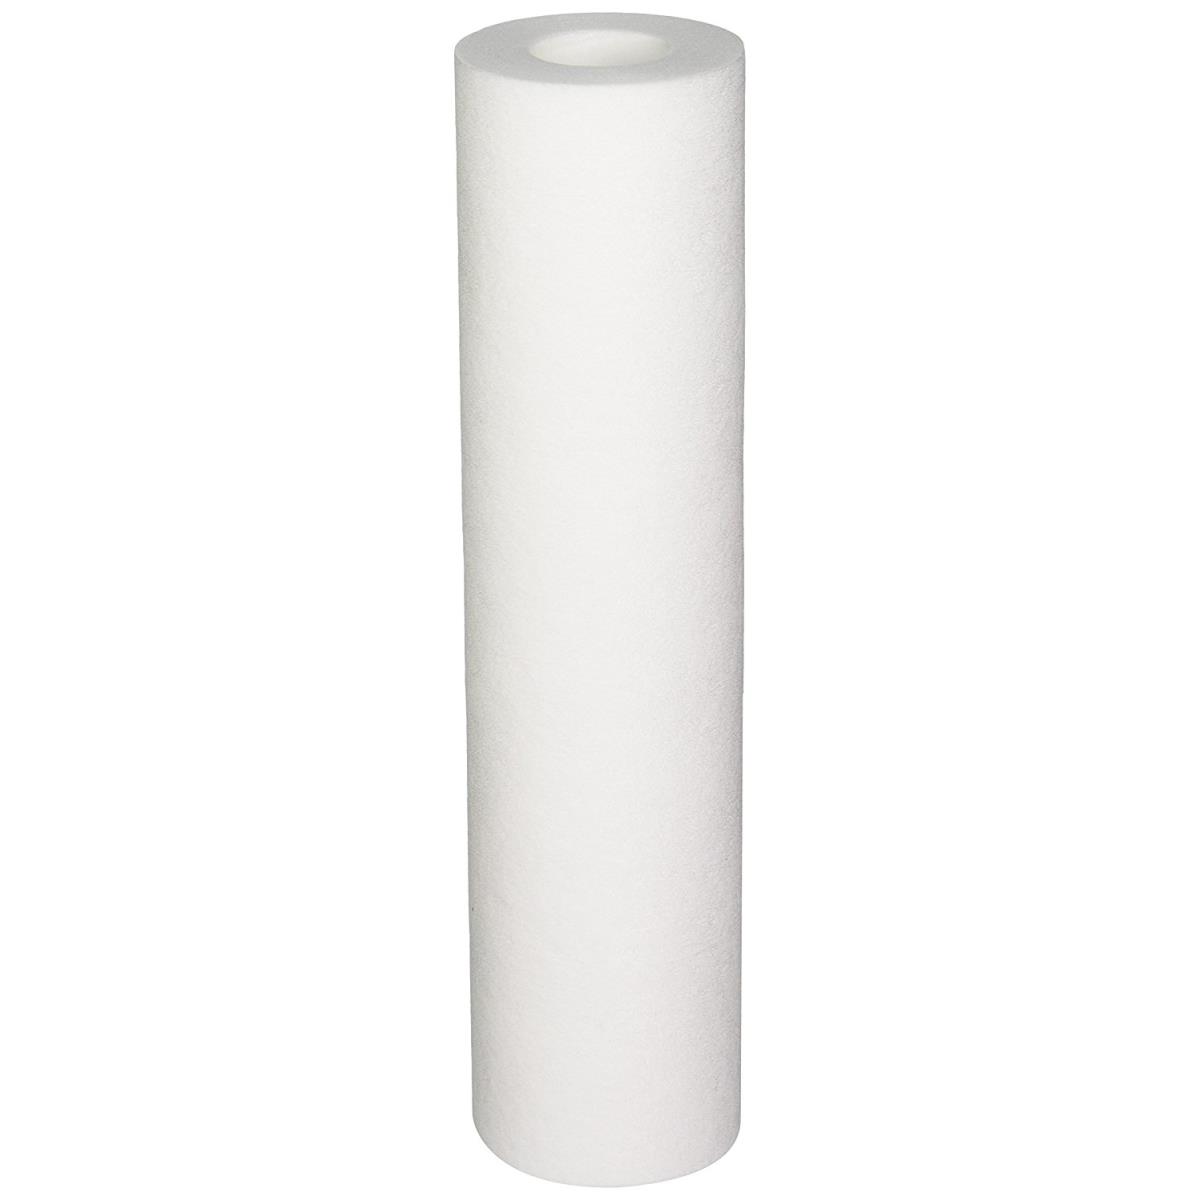 American-plumber-w5p Polypropylene Whole House Sediment Filter Cartridge, 5 Micron - Pack Of 2